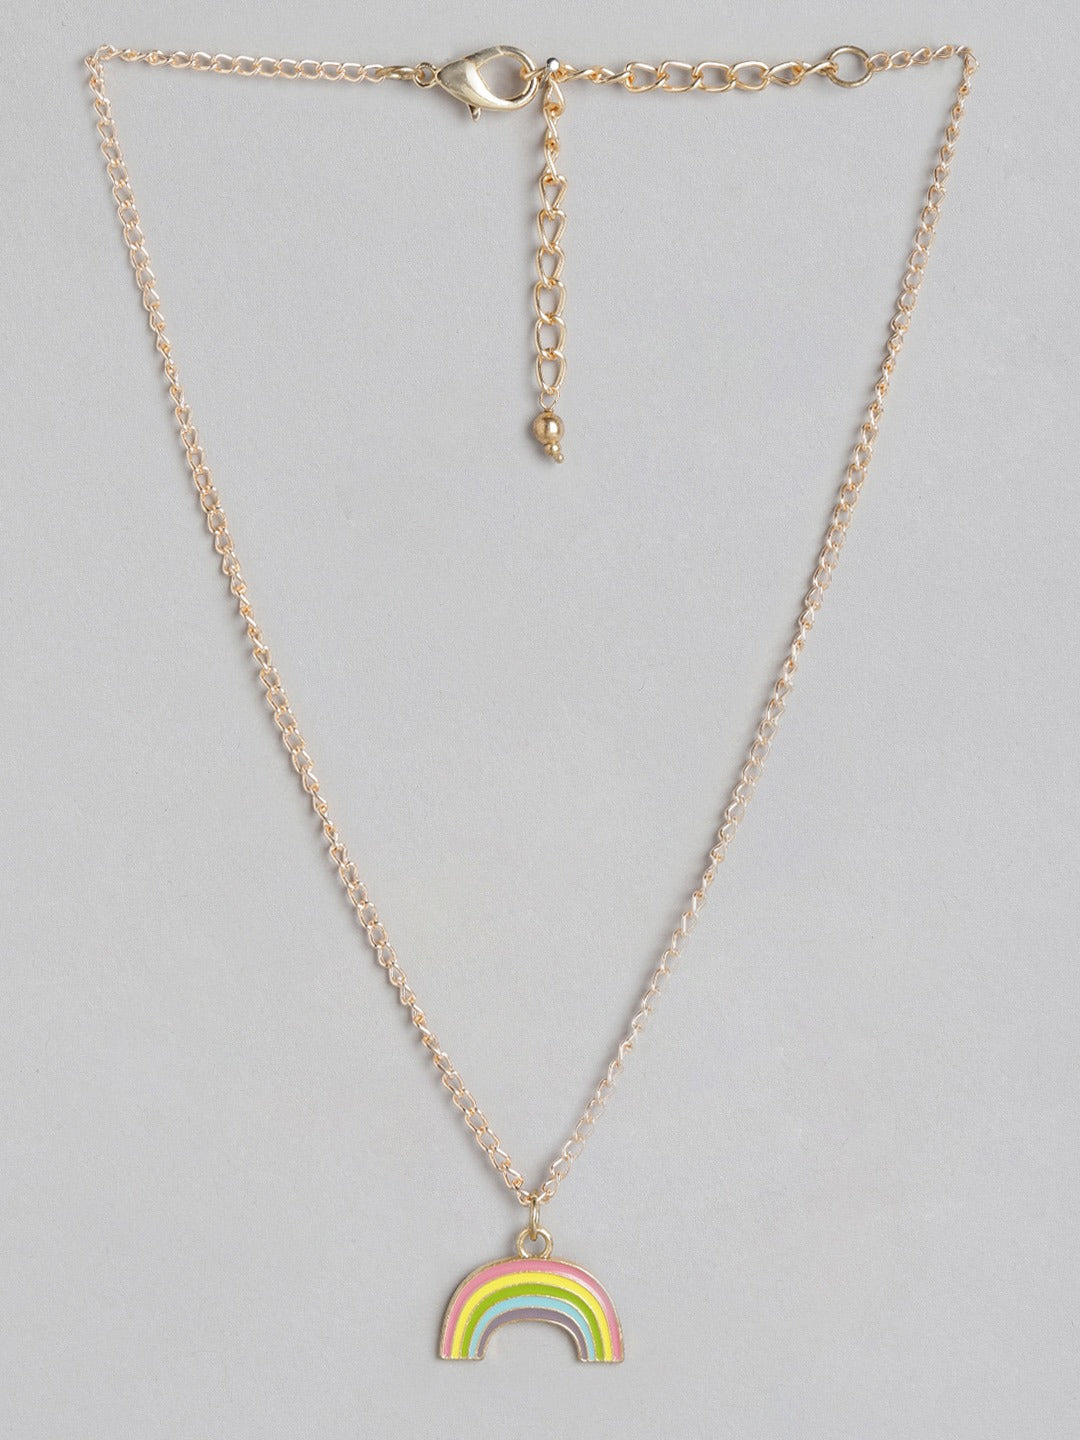 Blueberry gold plated chain layered pendant detailing necklace